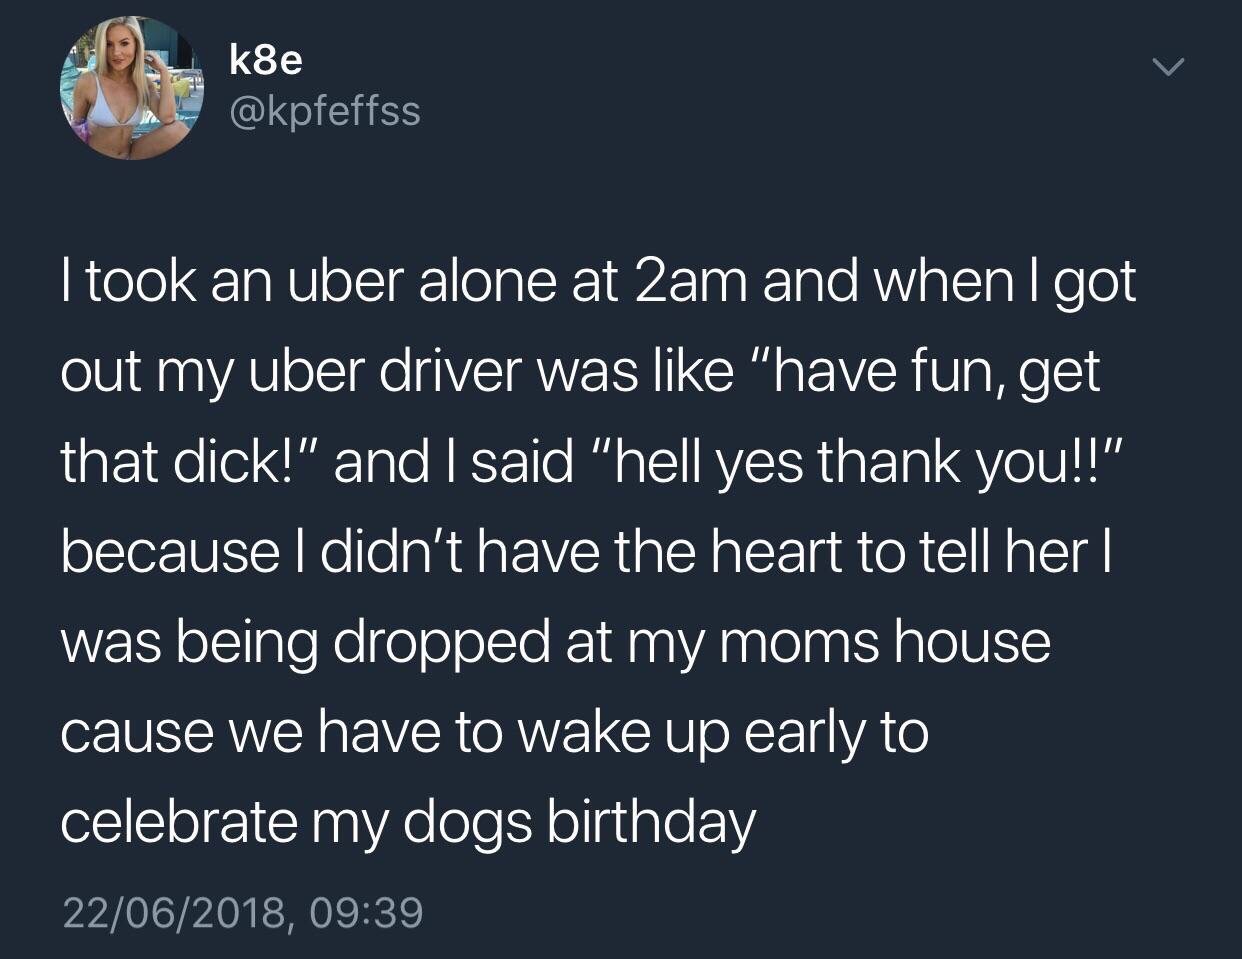 k8e I took an uber alone at 2am and when I got out my uber driver was "have fun, get that dick!" and I said "hell yes thank you!!" because I didn't have the heart to tell her | was being dropped at my moms house cause we have to wake up early to celebrate